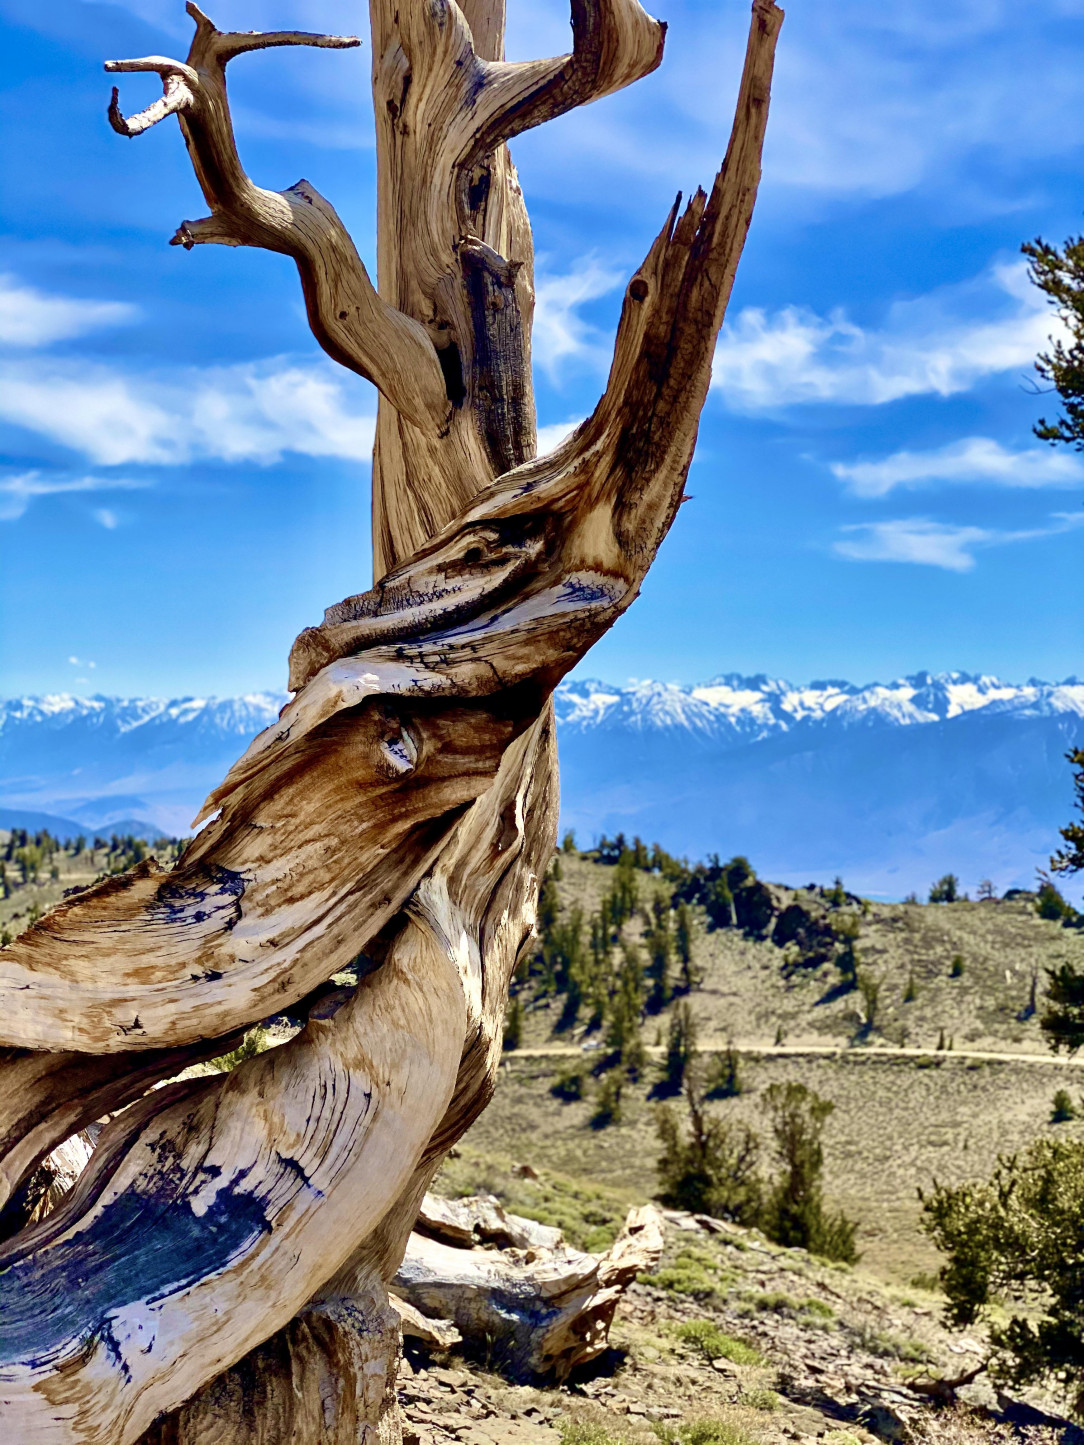 A 4,500 year old Ancient Bristlecone Pine, overlooking the Sierra Nevadas